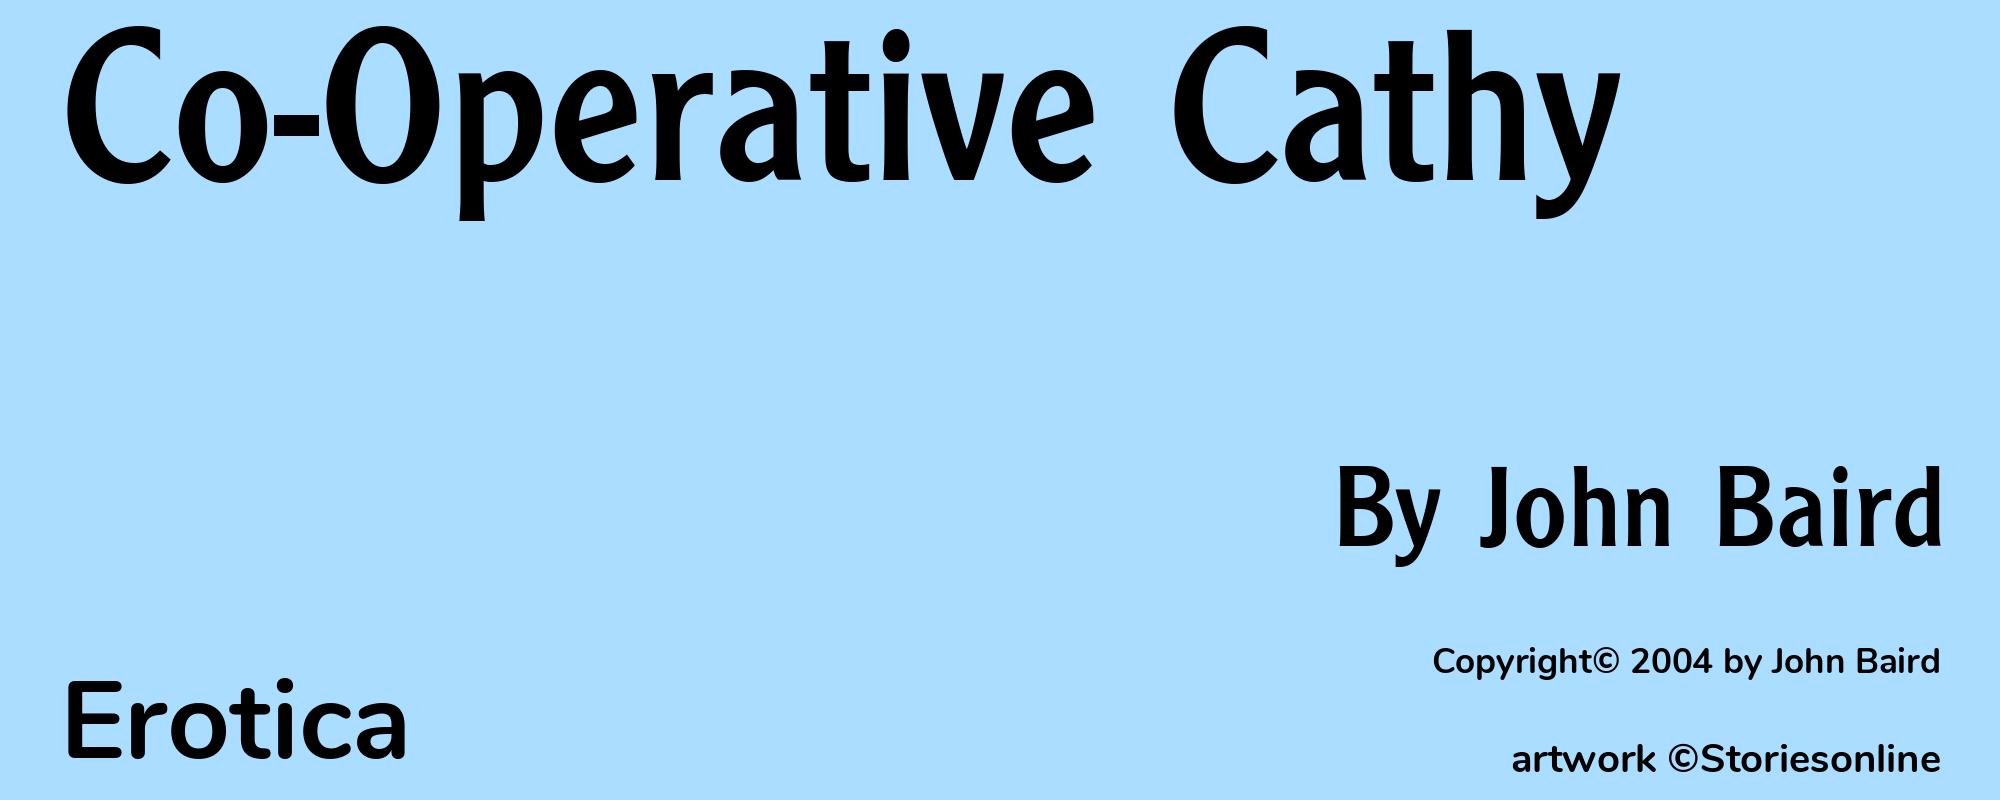 Co-Operative Cathy - Cover